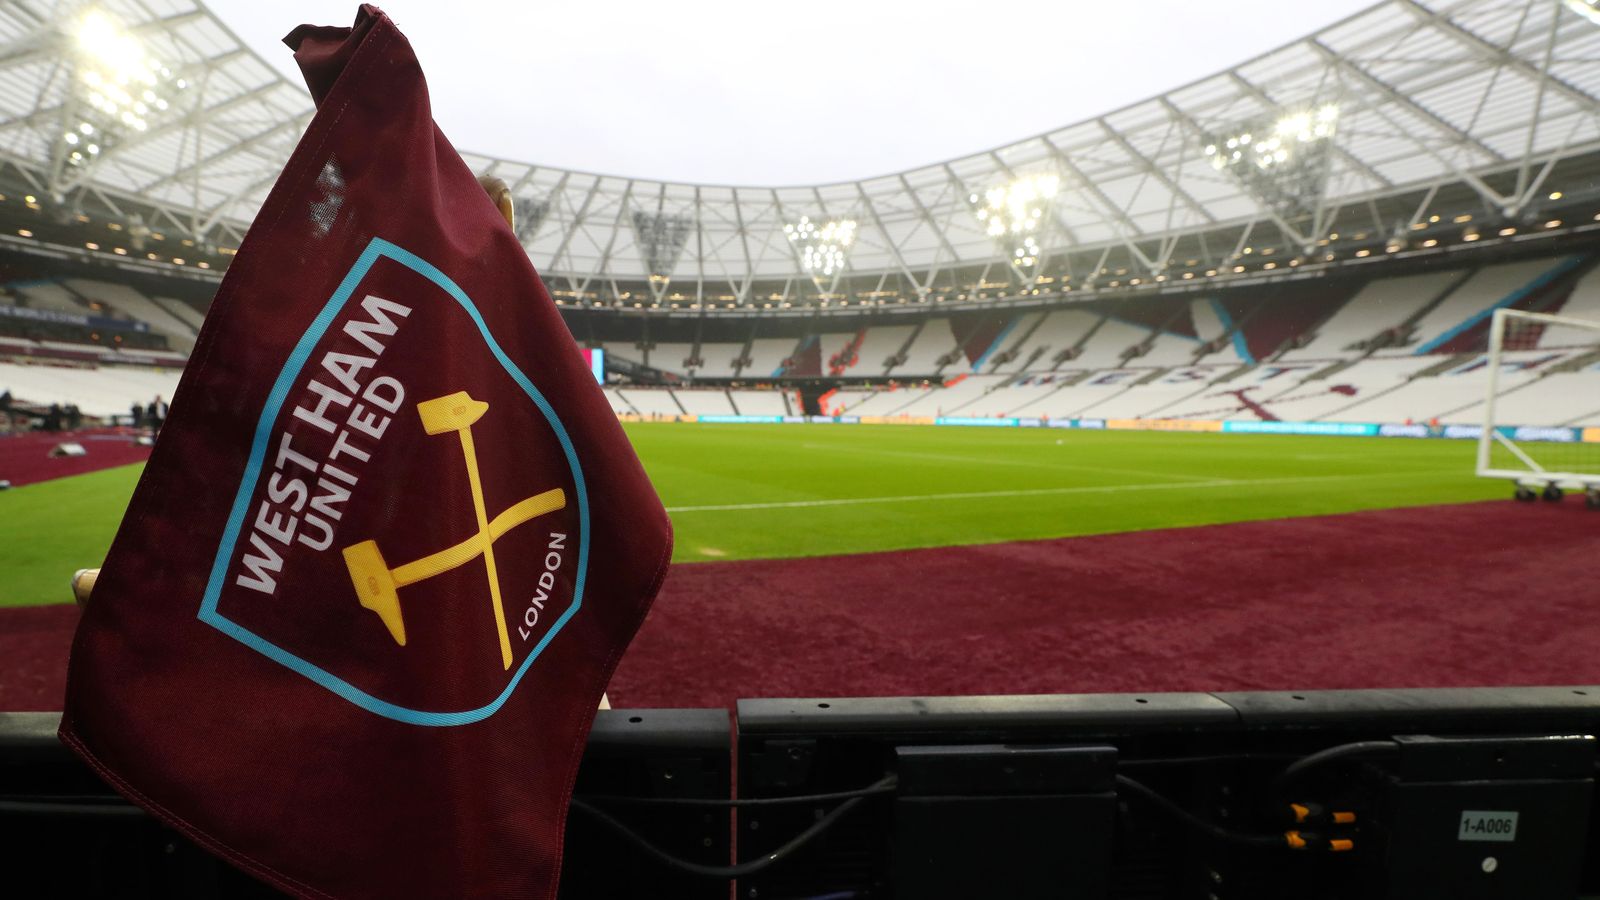 NEWS FLASH: West Ham offers a “significantly higher” salary that, crucially, includes “freedom to design squad.”